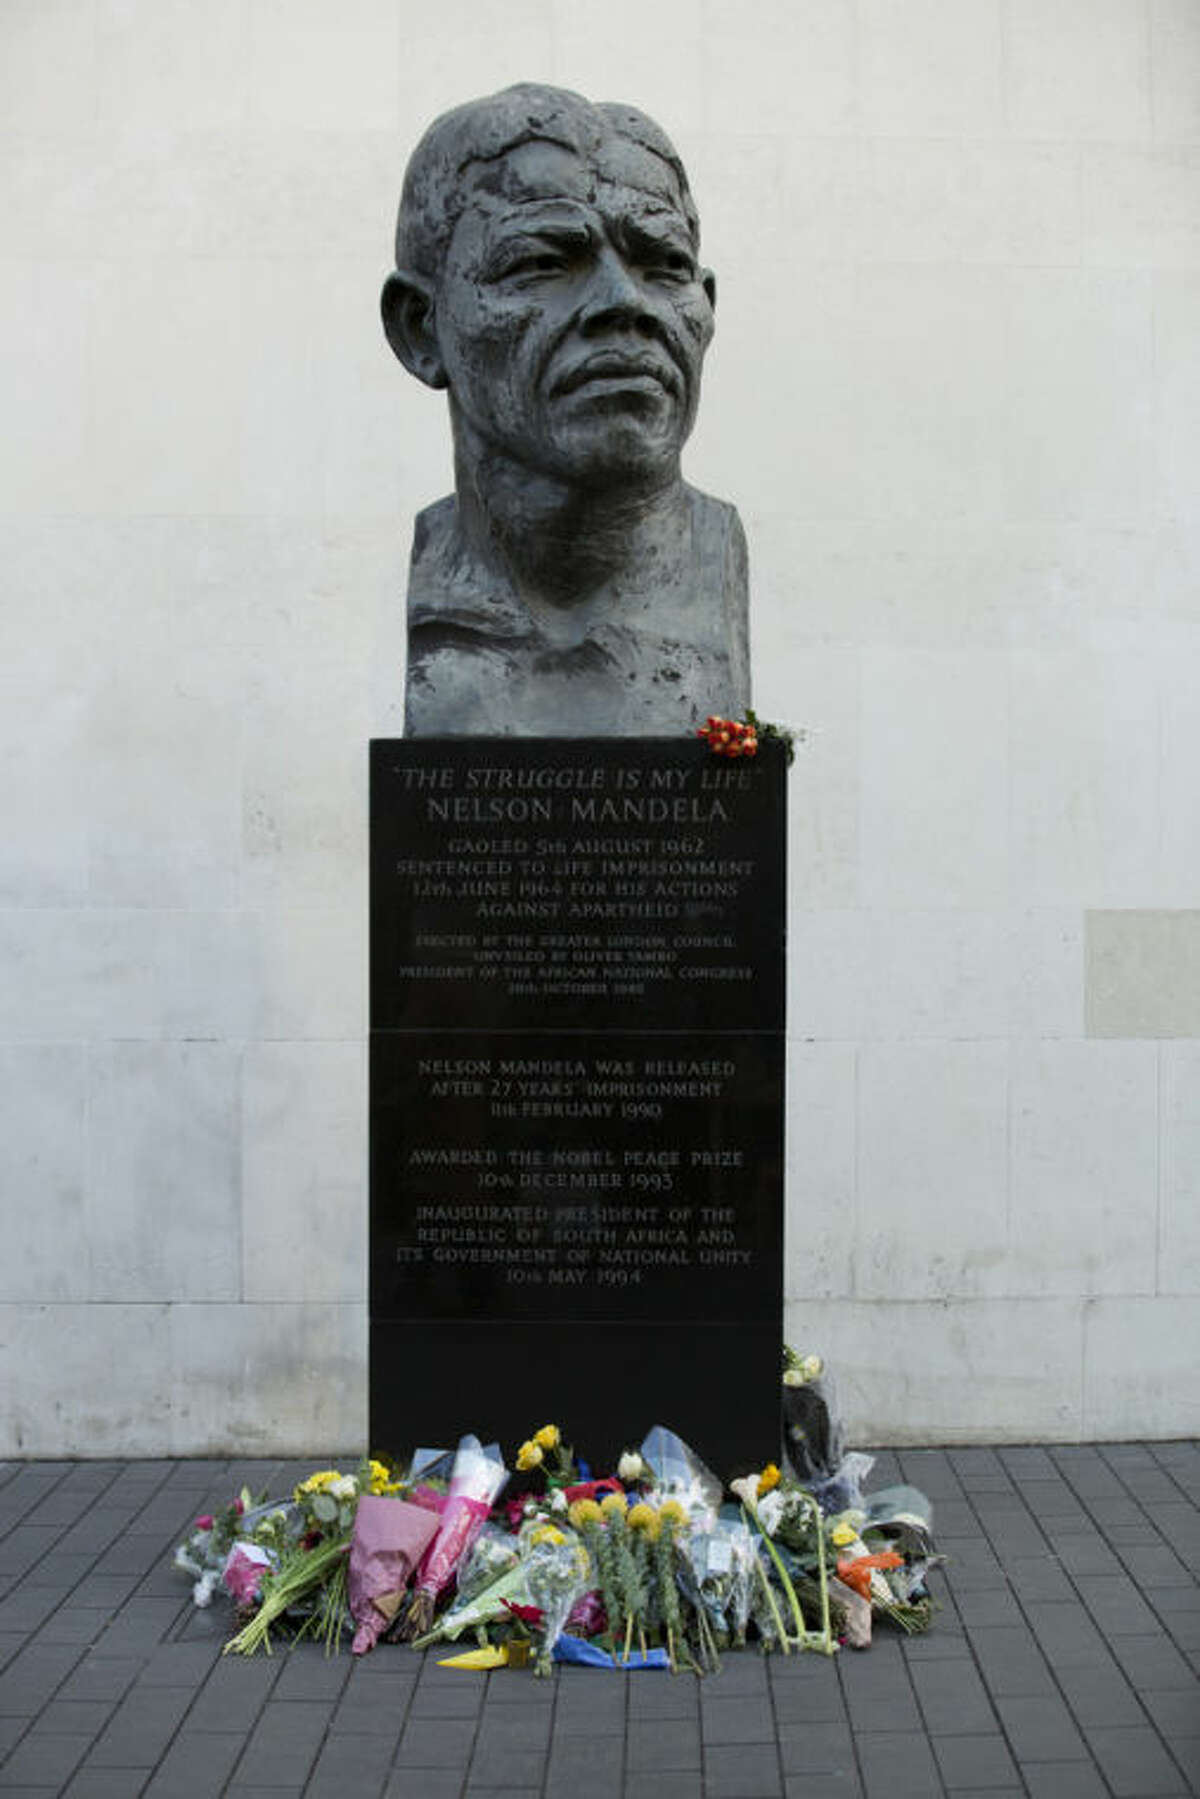 Flowers are seen underneath a statue of former South African president Nelson Mandela, at the side of the Royal Festival Hall on the south bank of London, Friday, Dec. 6, 2013. Mandela passed away Thursday night after a long illness. He was 95. As word of Mandela's death spread, current and former presidents, athletes and entertainers, and people around the world spoke about the life and legacy of the former South African leader. (AP Photo/Jon Super)